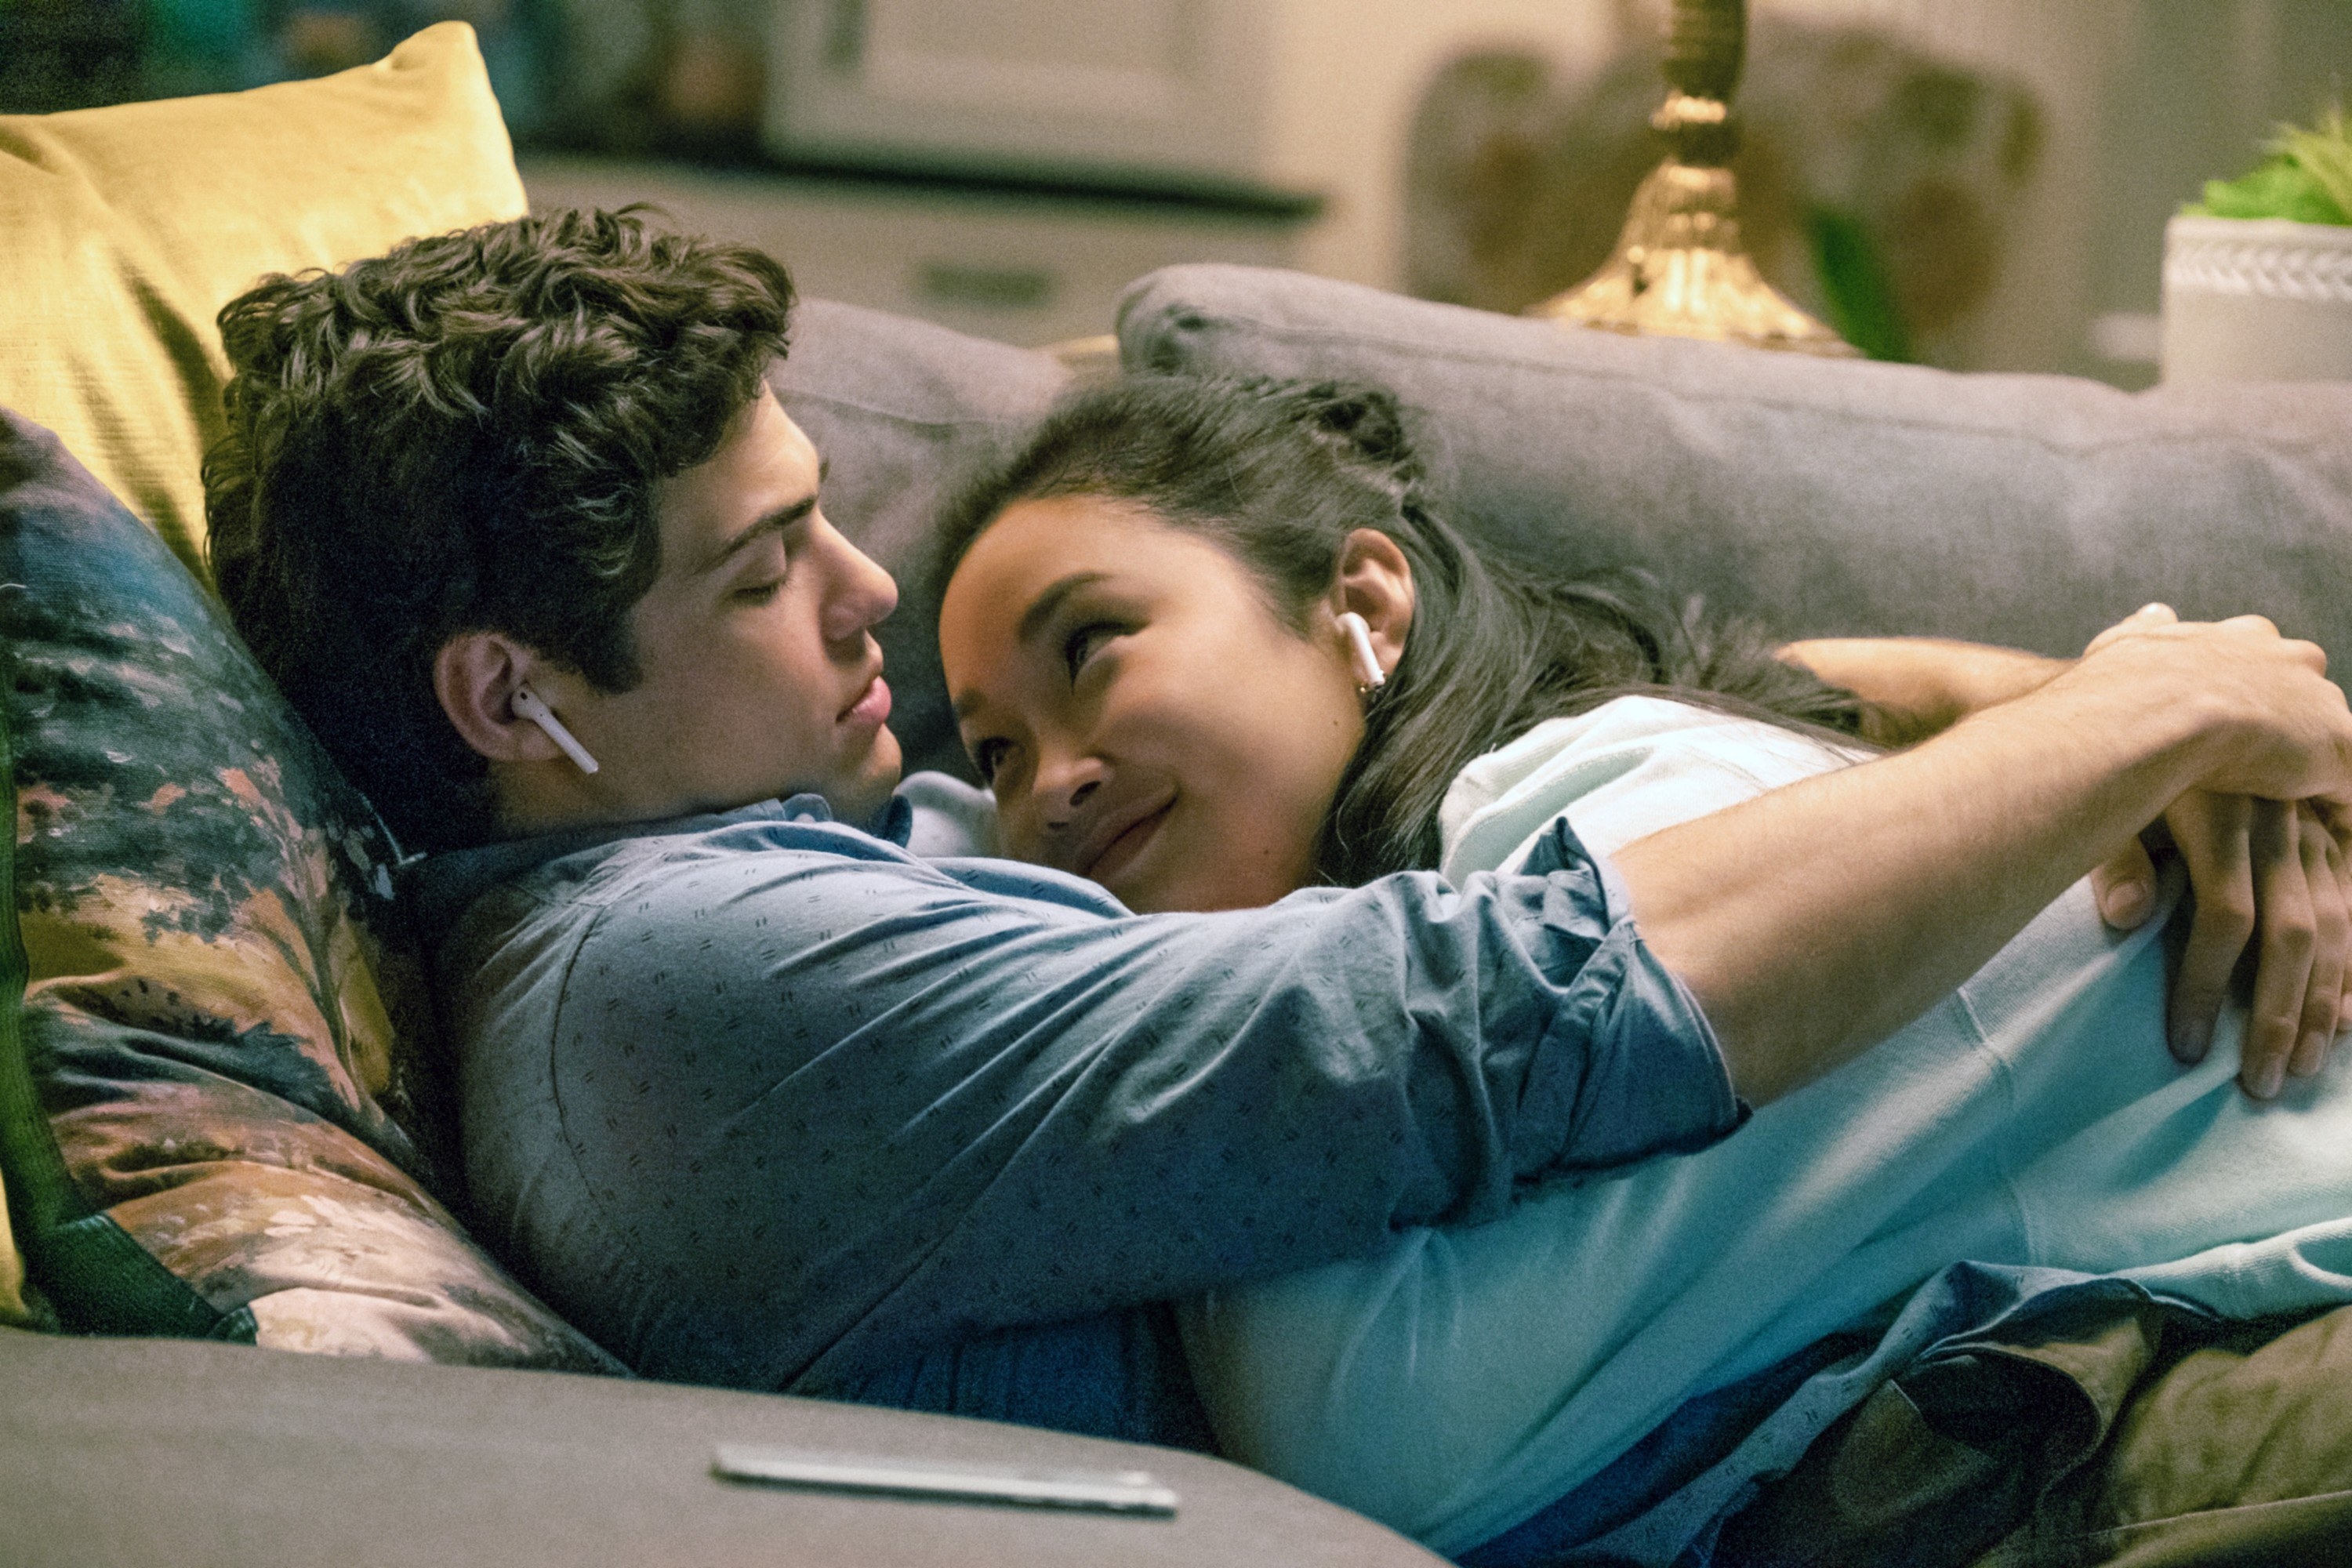 Lara Jean and Peter cuddling on couch